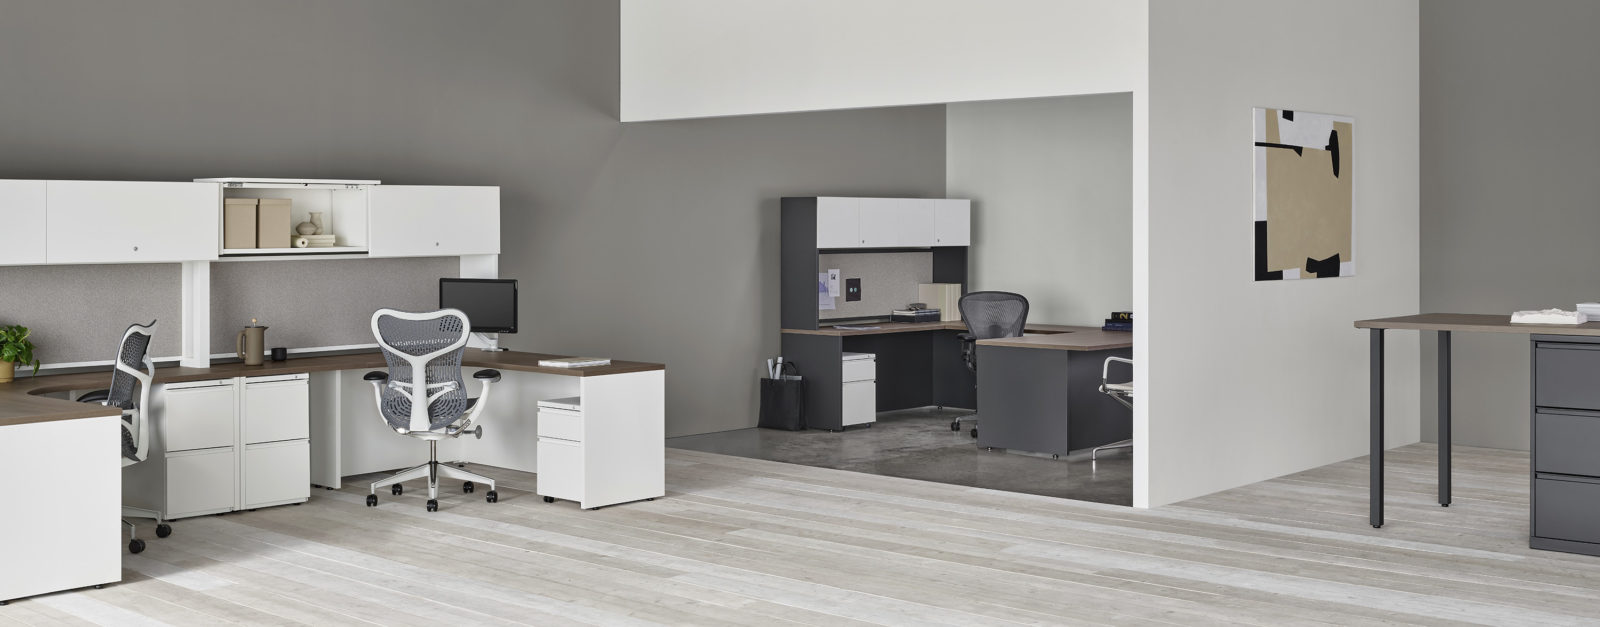 Cluster of 2 Herman Miller workstations in white finish with dark wood tops; U-shape private office in background in black finish with dark wood tops